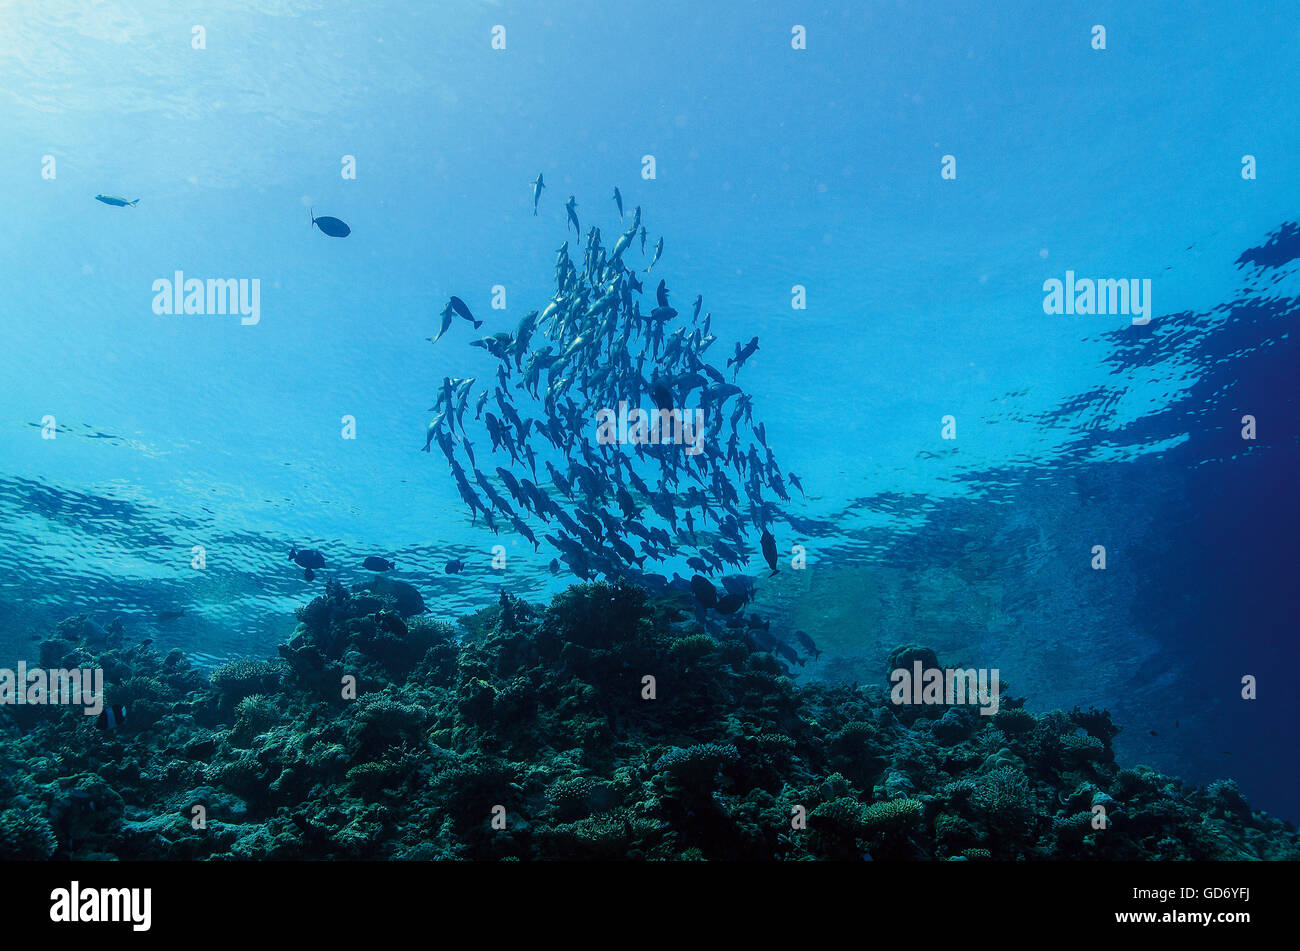 Shoal of Snubnose rudderfish, Kyphosus cinerascens, spawning on top of coral reef, Maldives, Indian Ocean Stock Photo